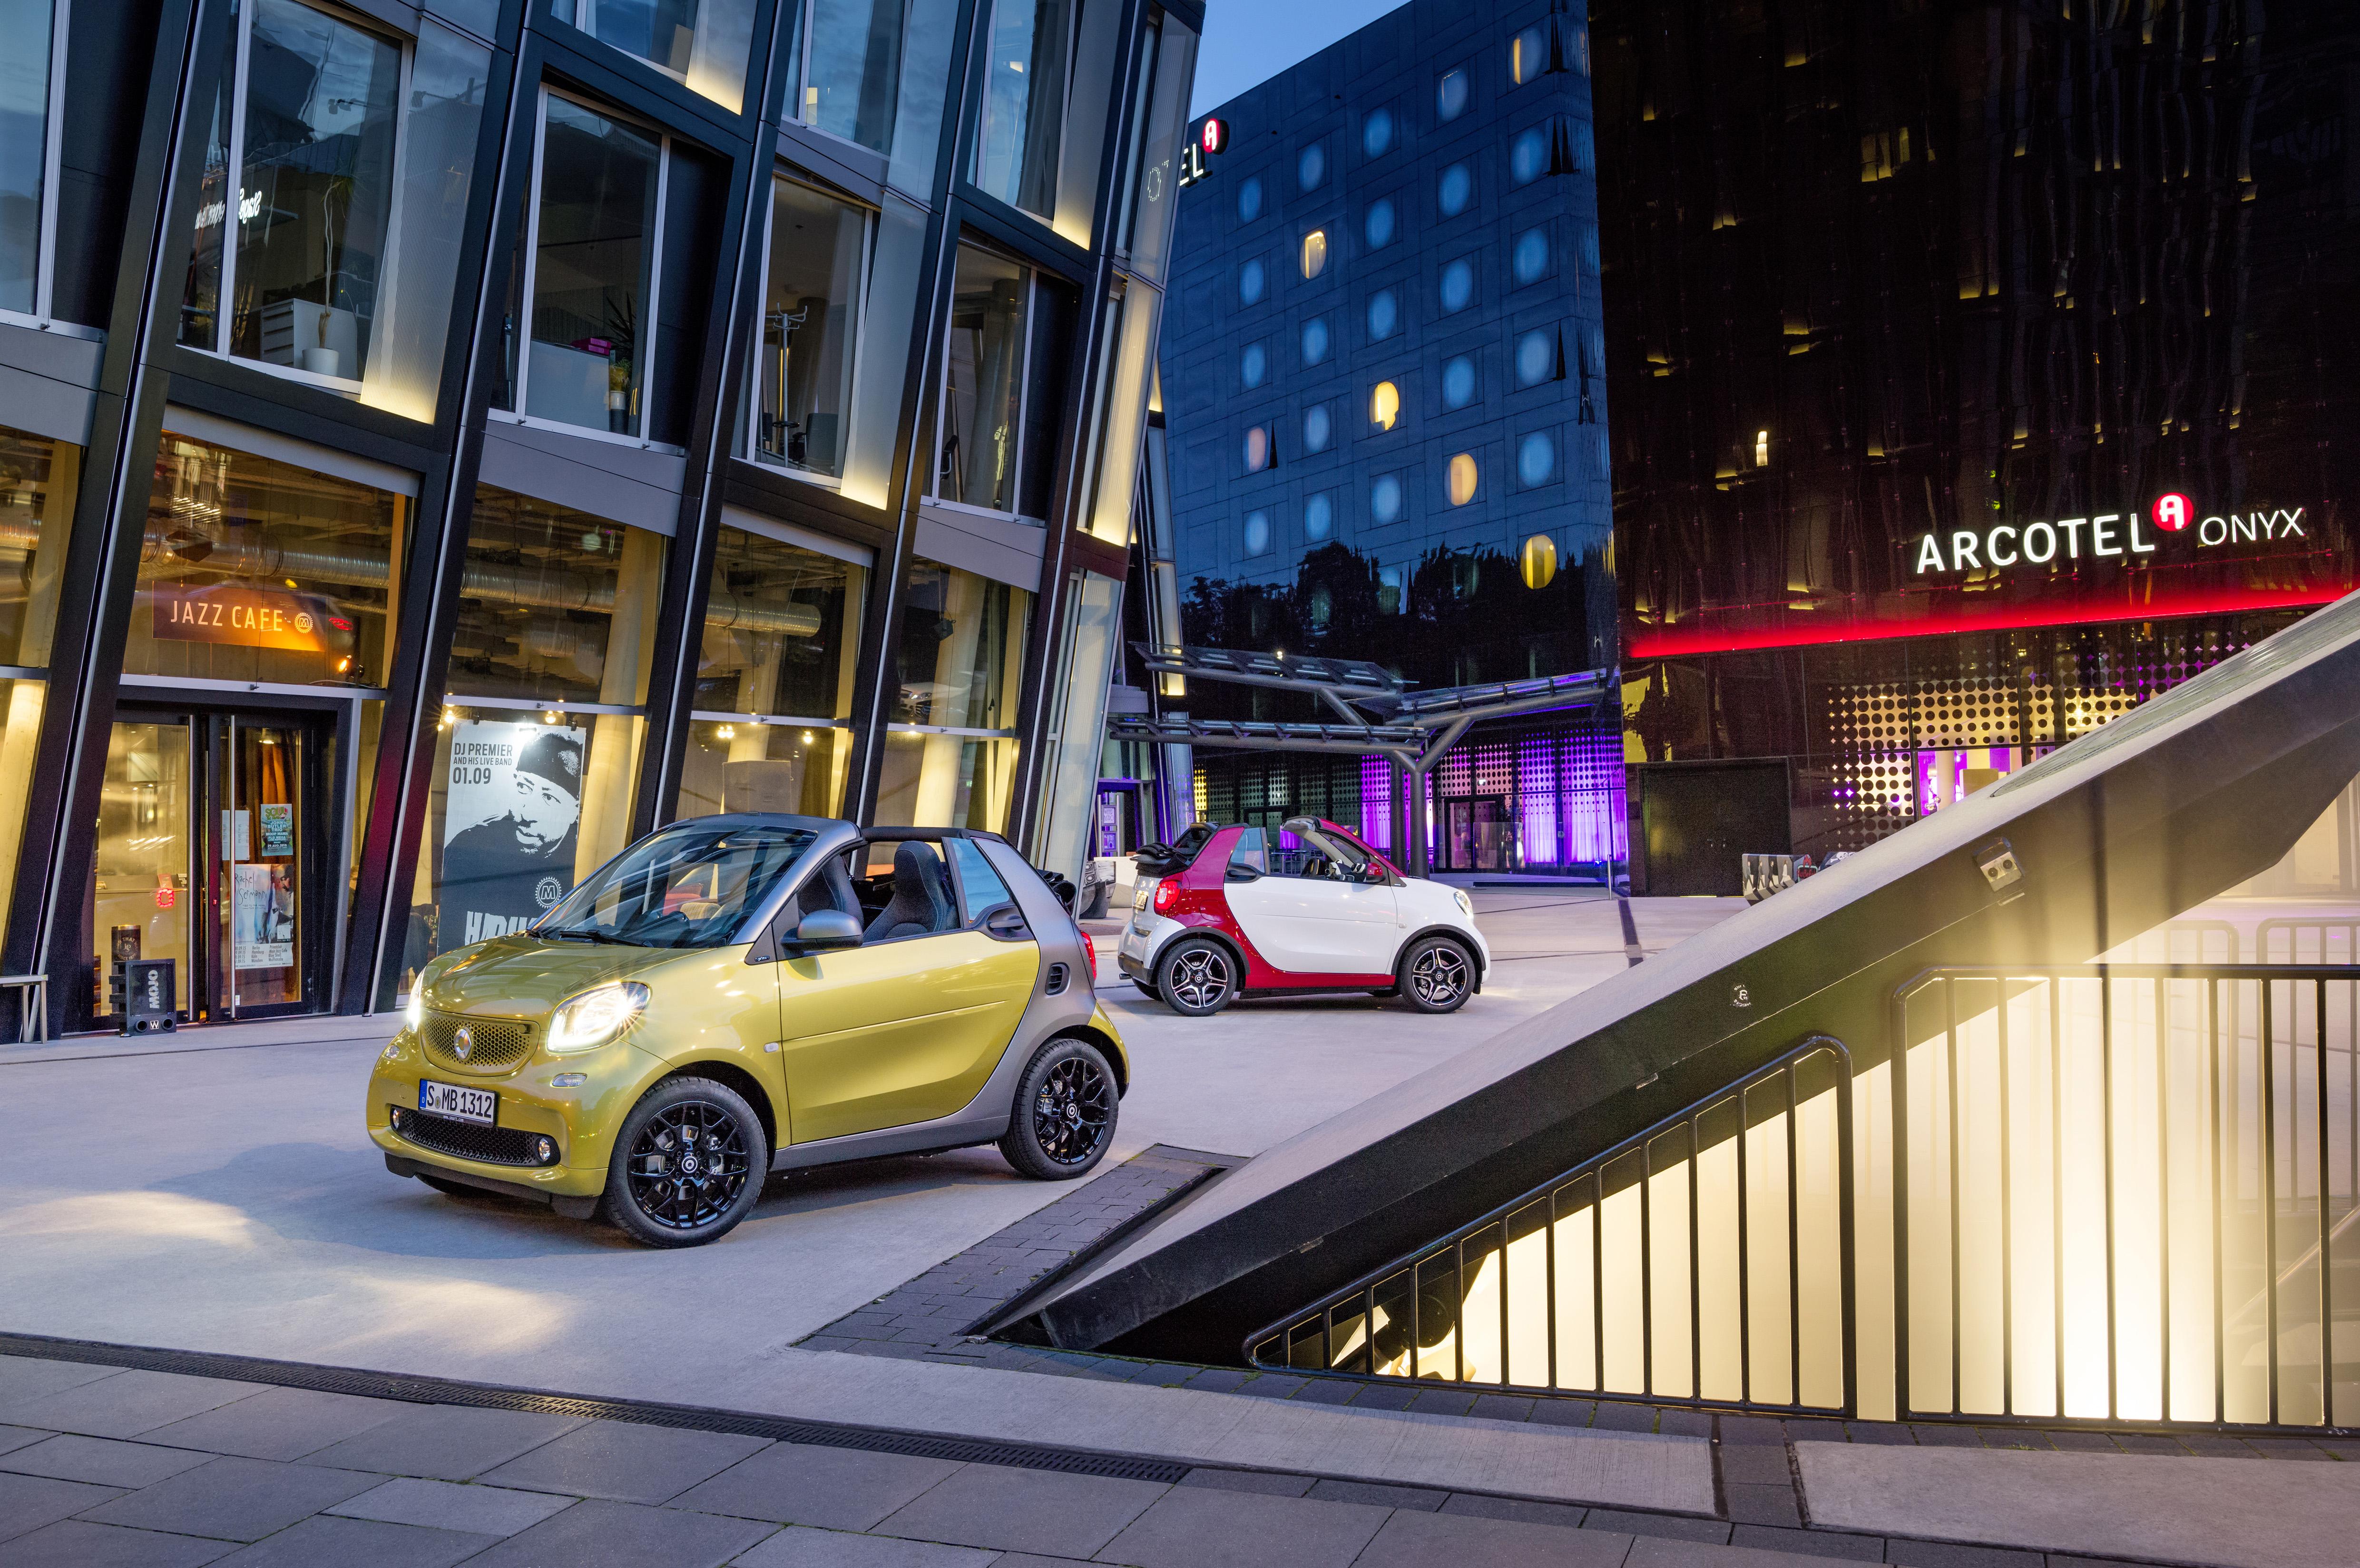 Smart Fortwo Wallpaper HD Photo, Wallpaper and other Image